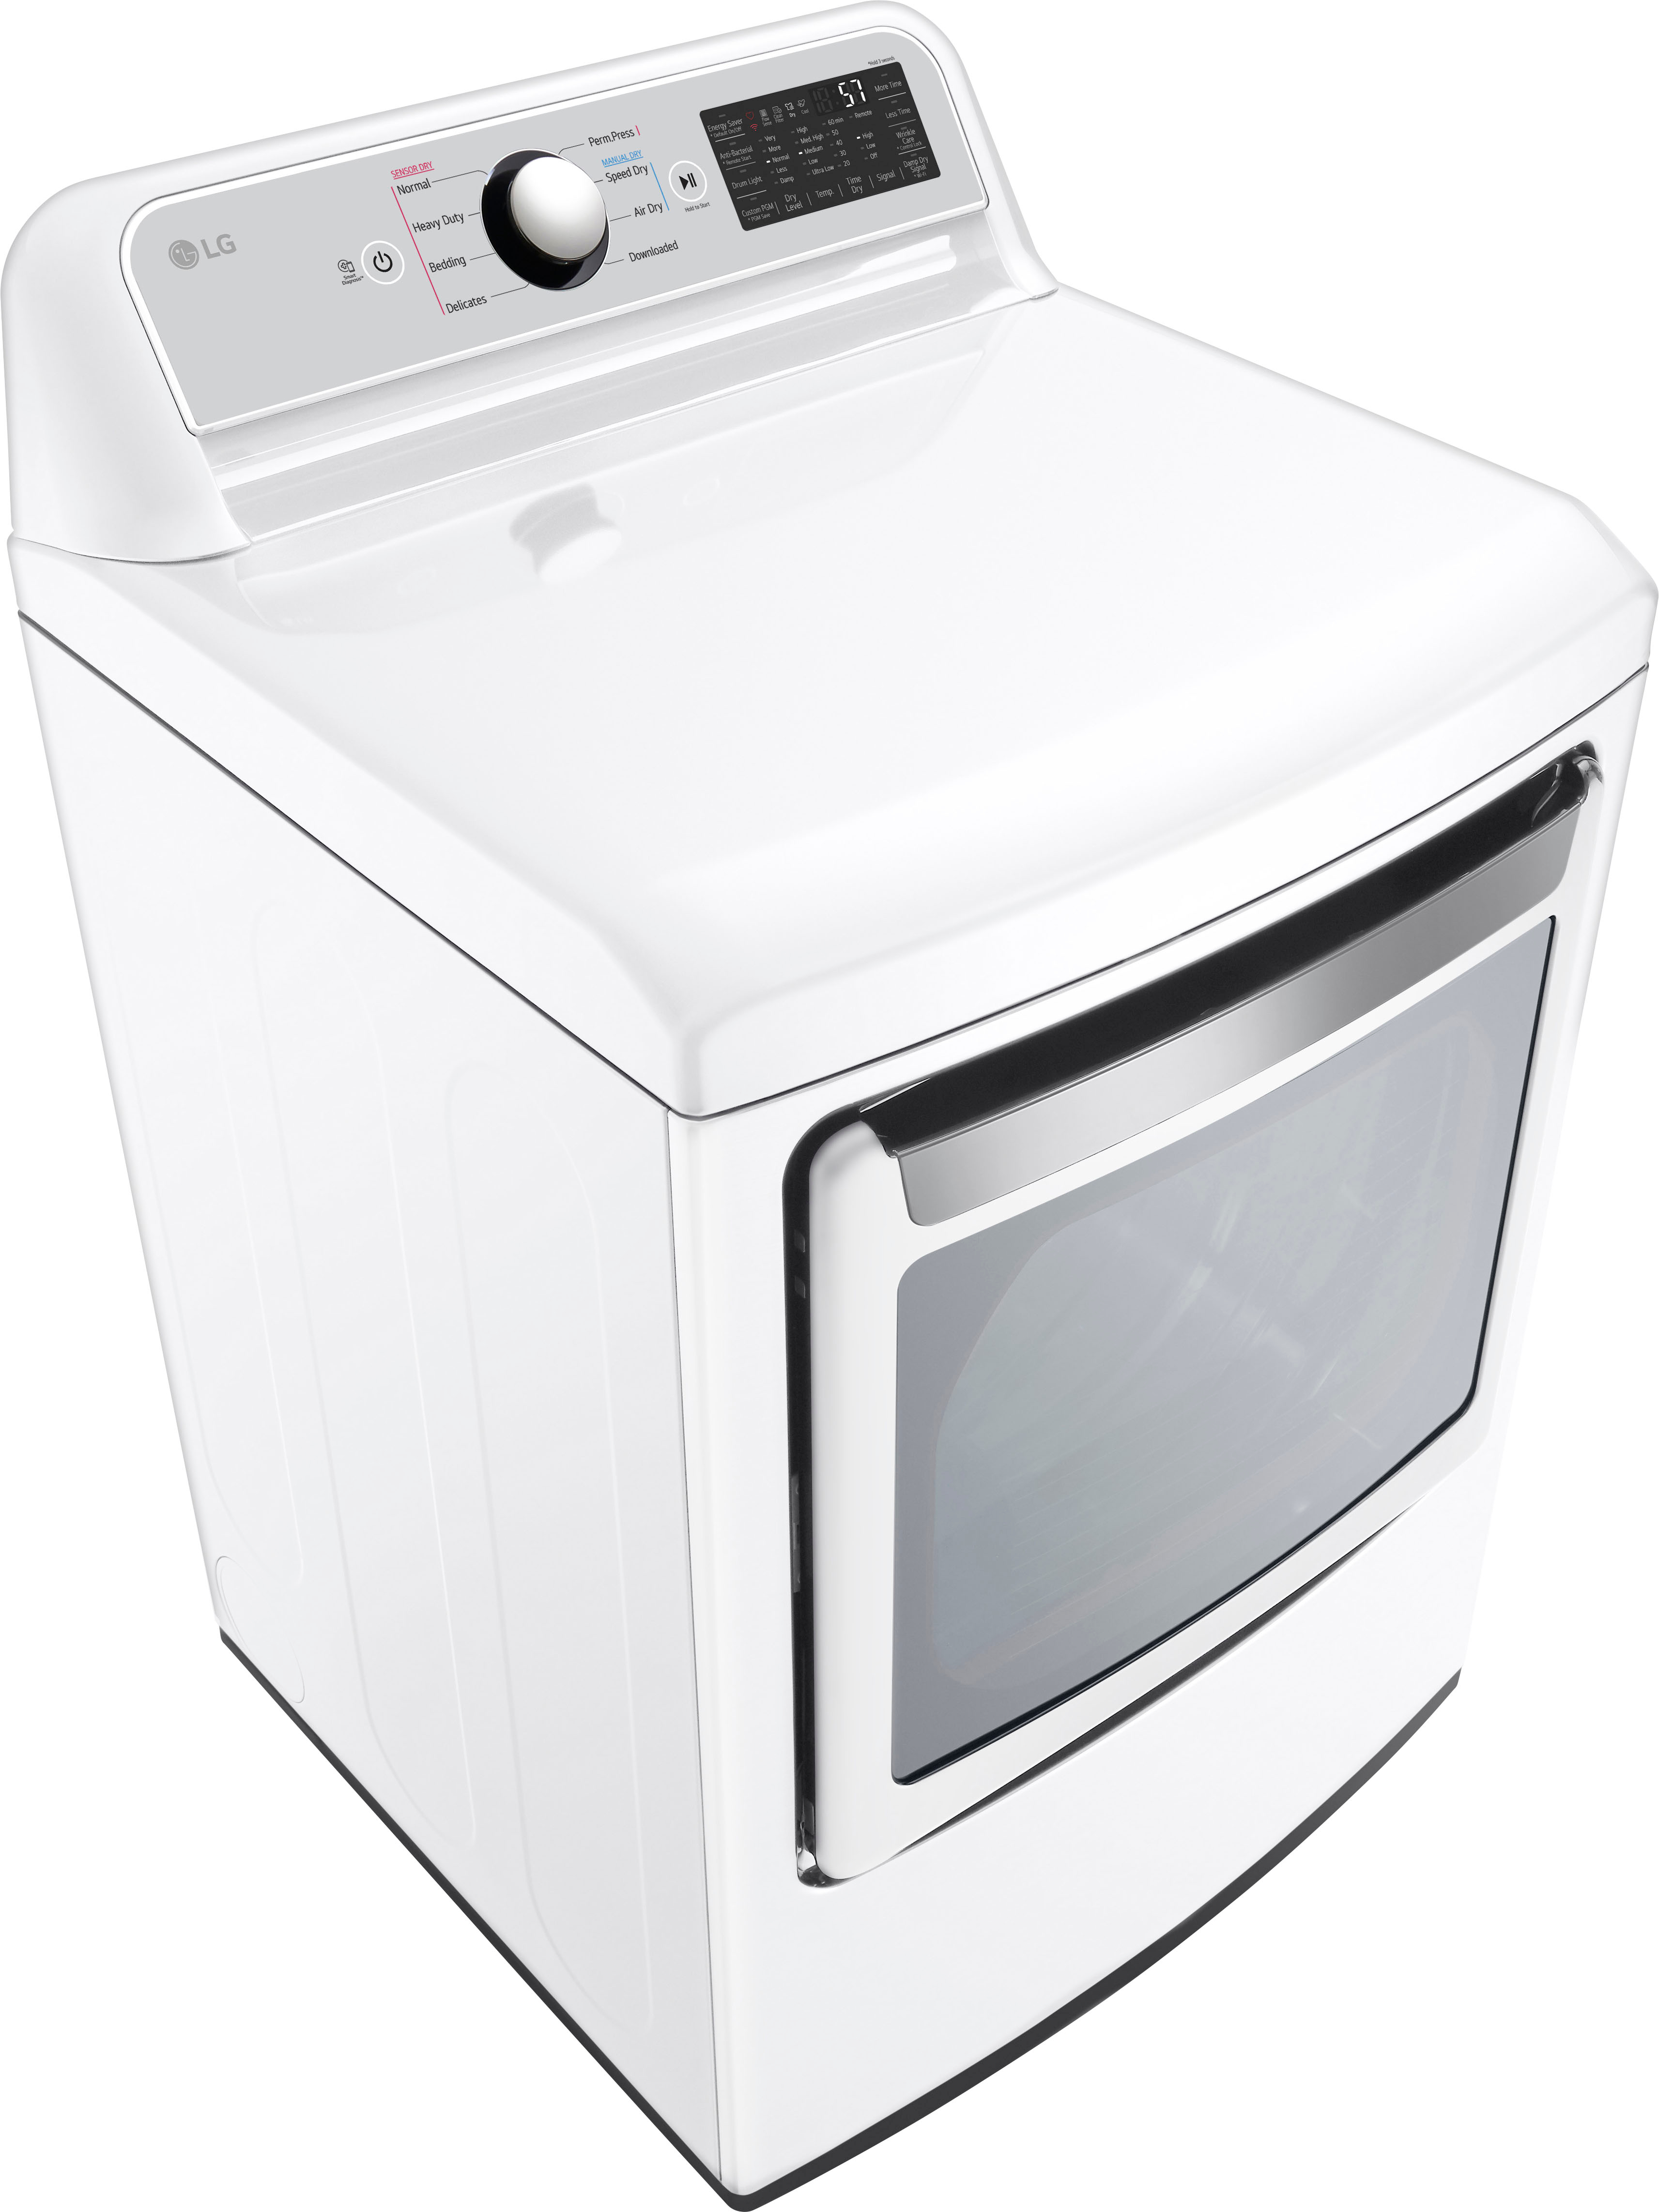 Angle View: LG - 7.3 Cu. Ft. Smart Gas Dryer with EasyLoad Door - White